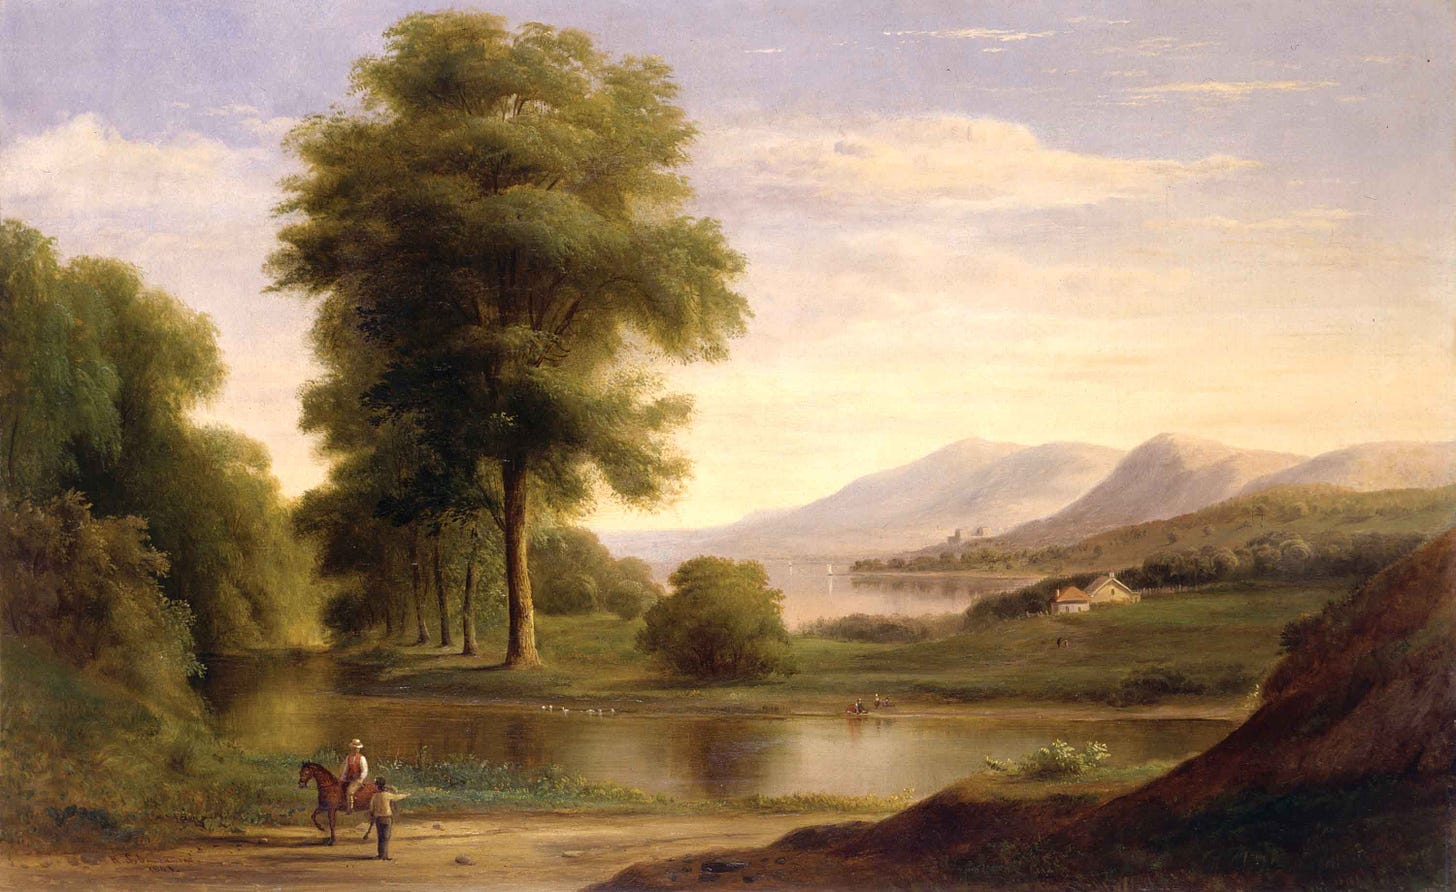 File:Meeting by the River by Robert Seldon Duncanson, 1864.jpg - Wikimedia  Commons